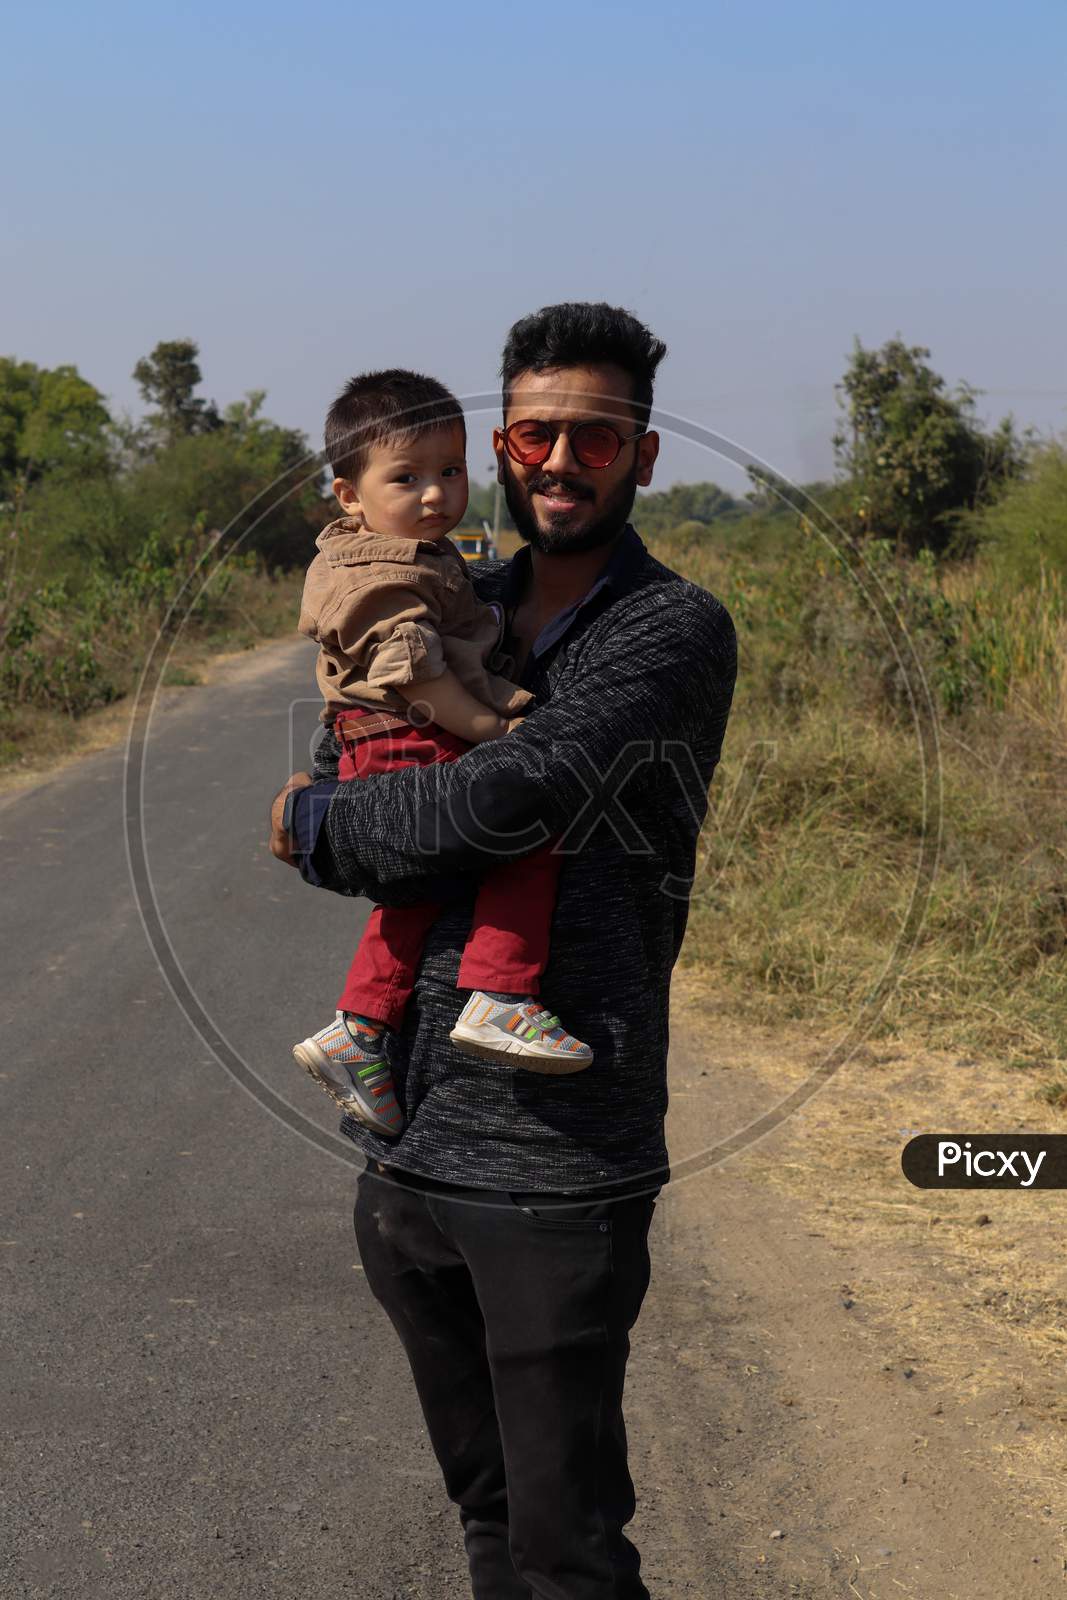 Father And Son On Road On Forest Road Spending Happy Time Together On Nature Background.